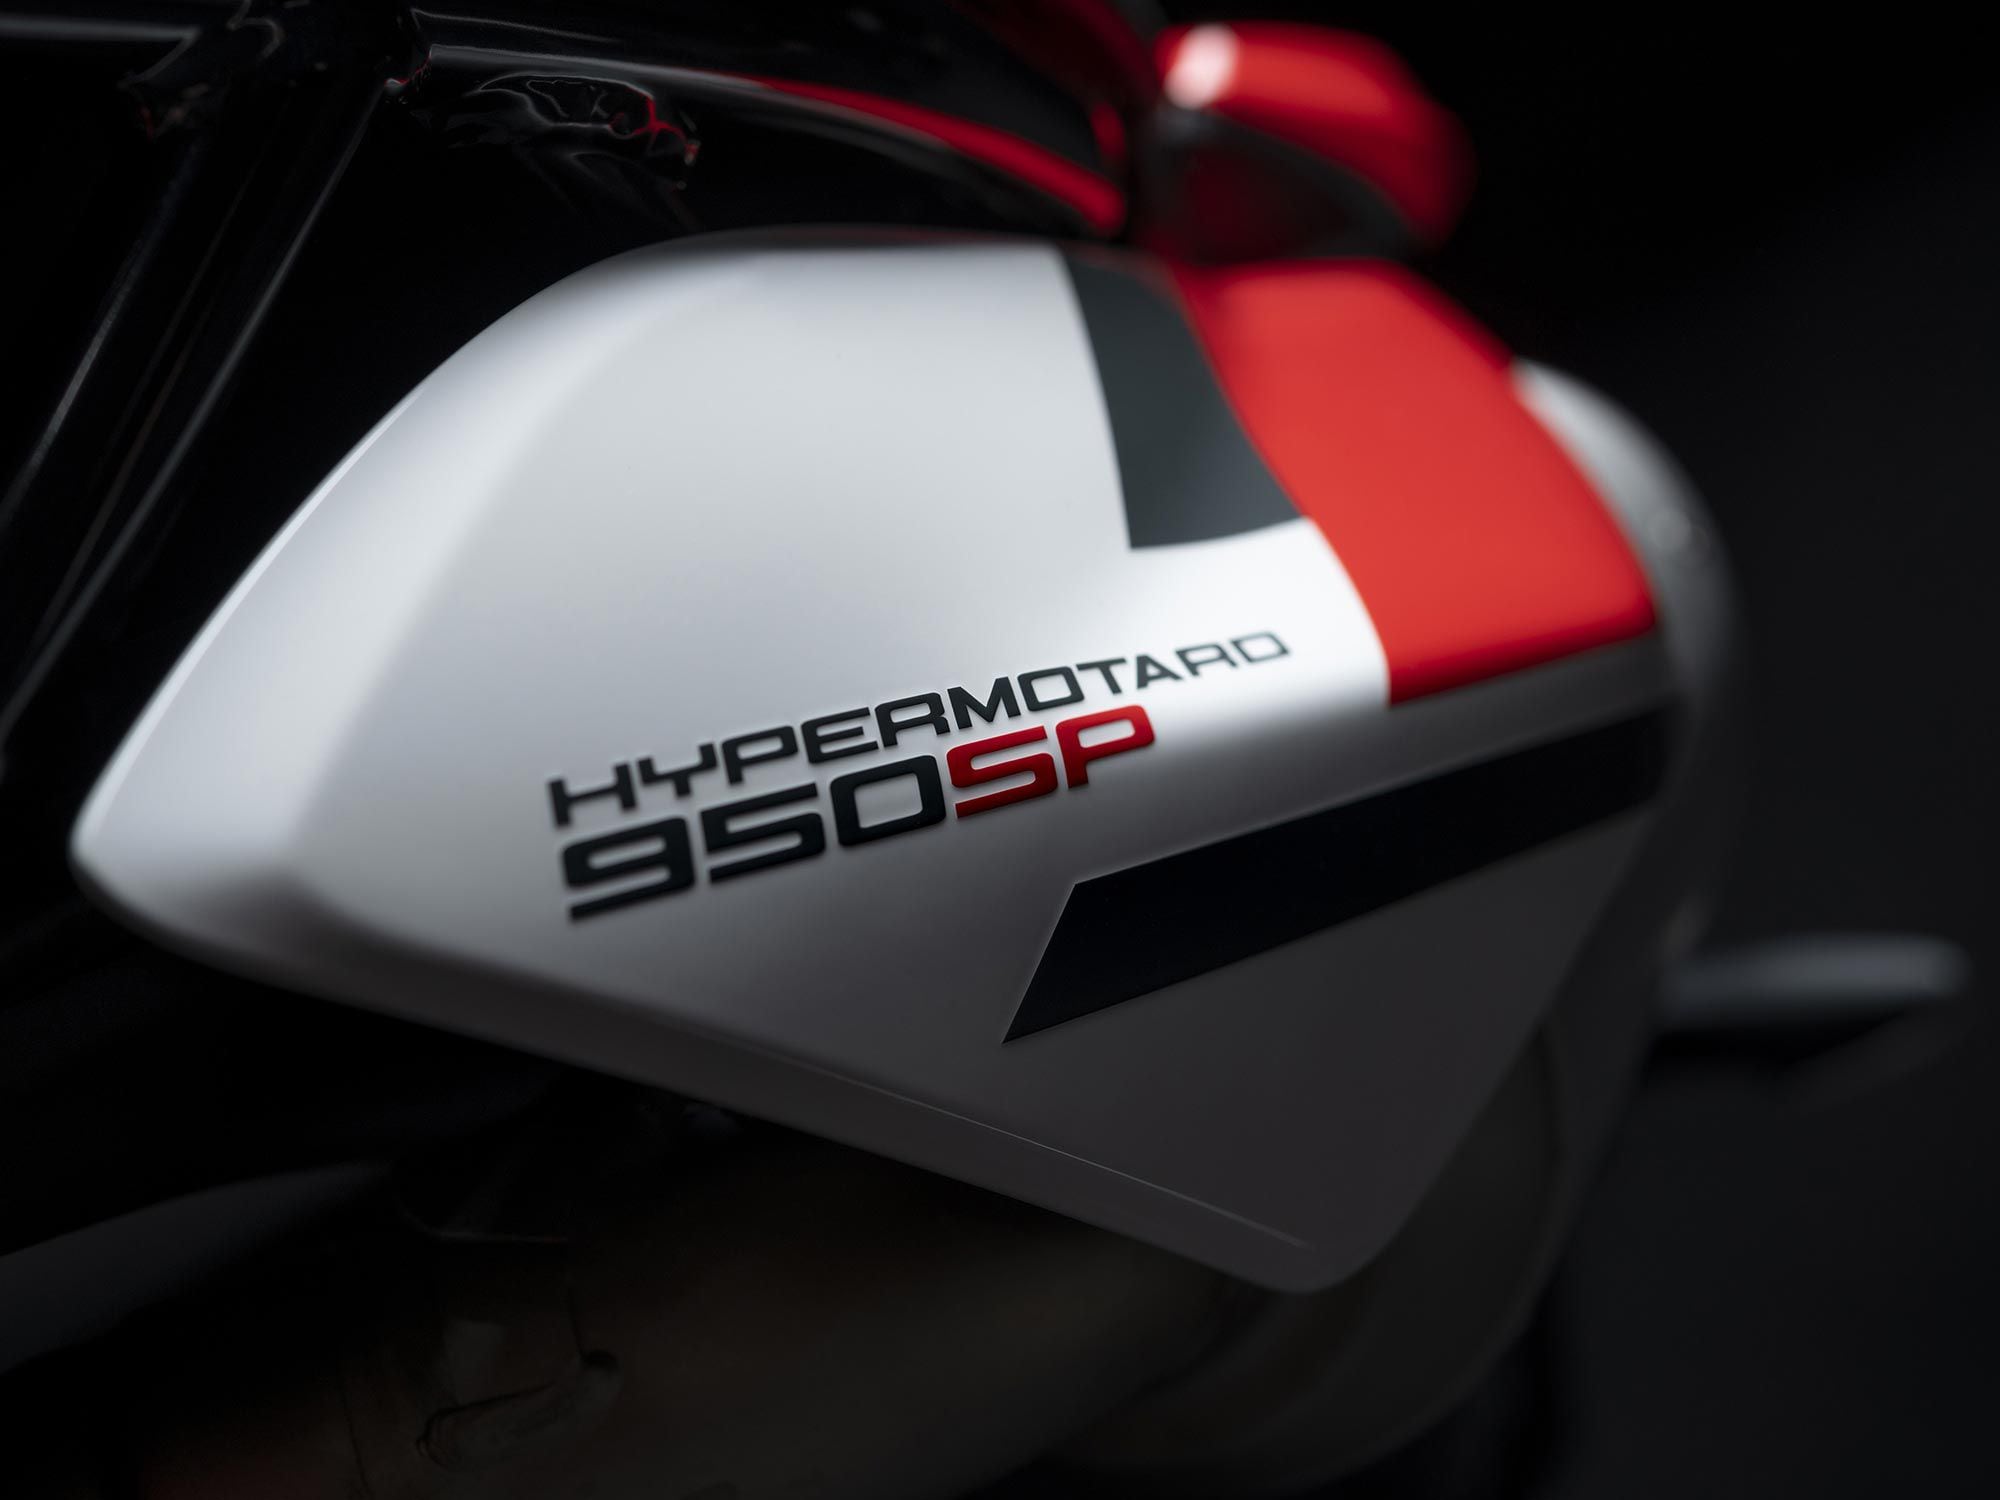 The graphics treatment carries over to the side panels, which will have to be eighty-sixed if one opts for the Termignoni full exhaust system from Ducati’s performance catalog.